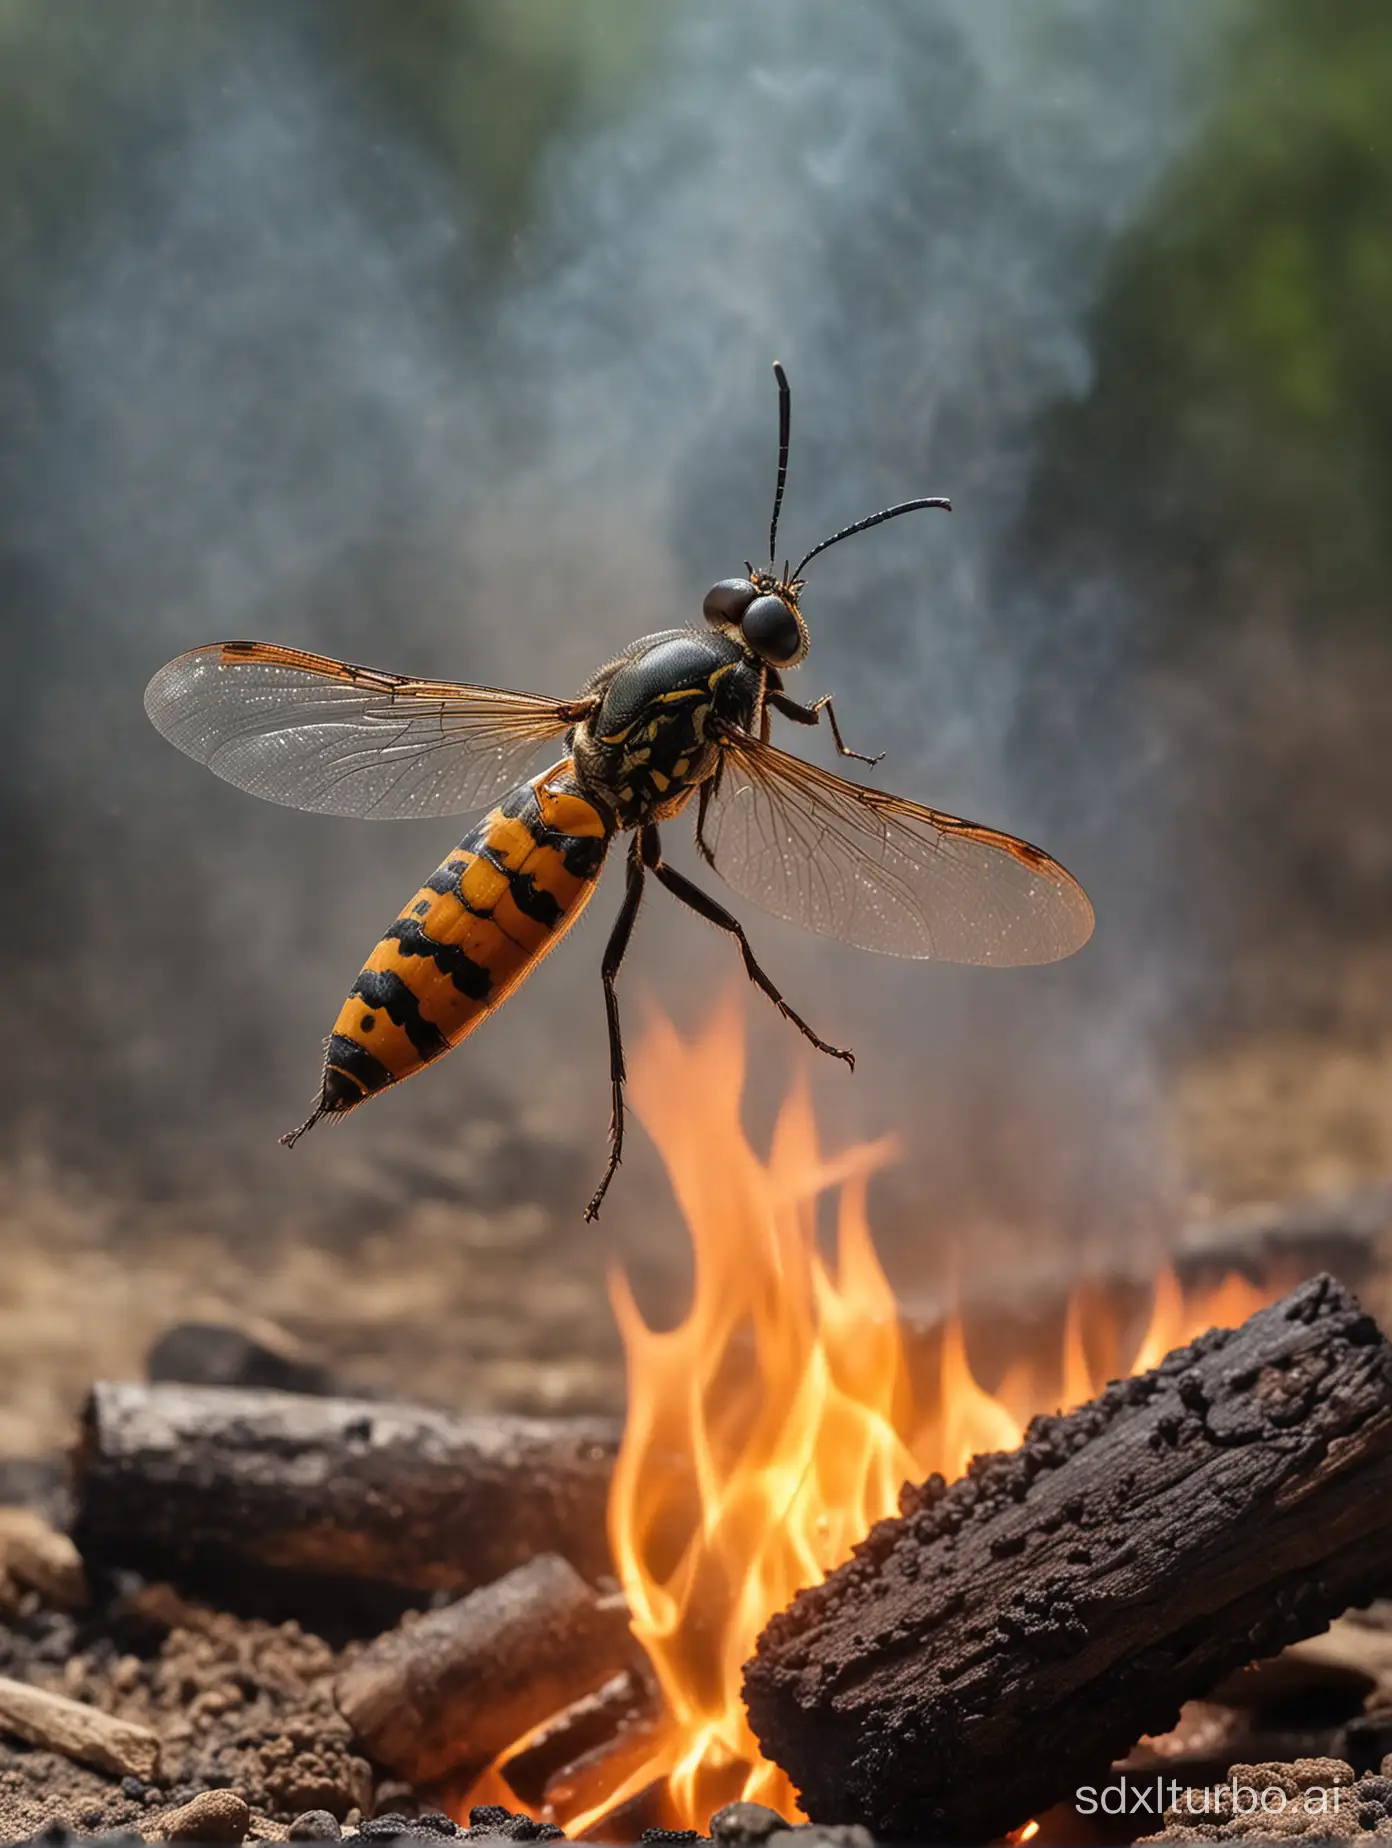 The summer insect that flies into the fire.